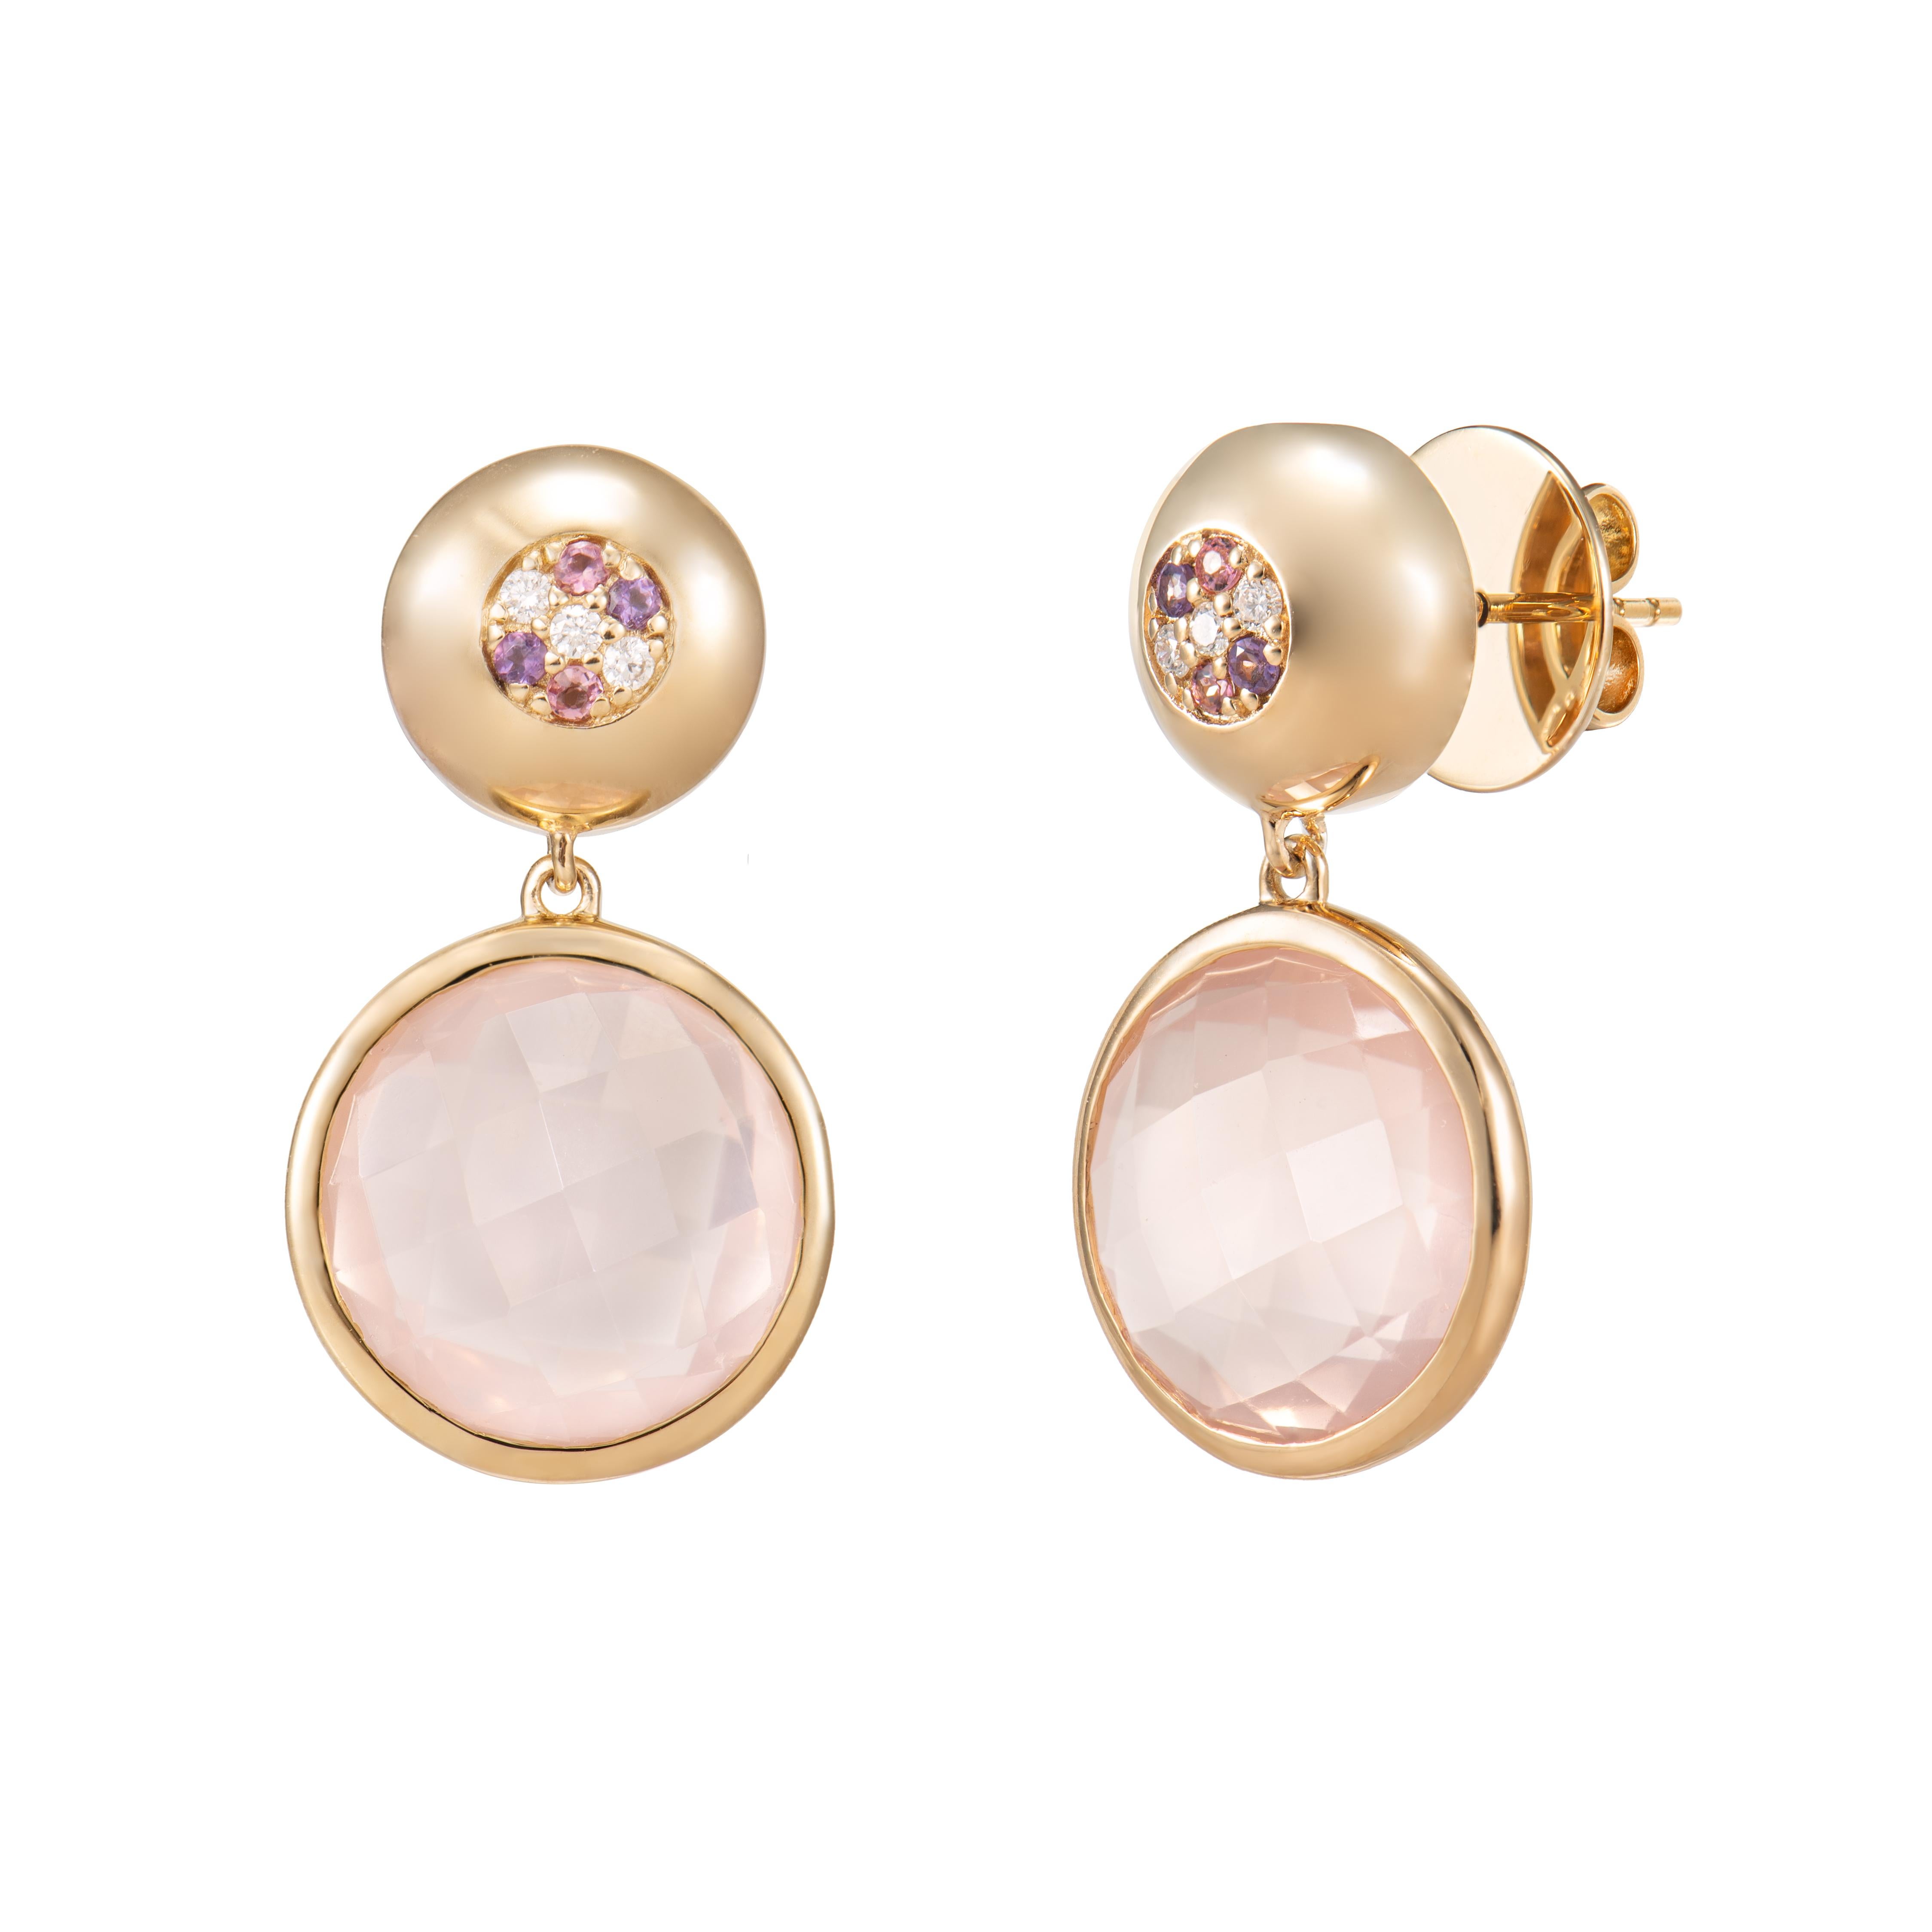 Briolette Cut 19.54 Carat Rose Quartz Drop Earring in 18KYG with Multi Gemstone and Diamond. For Sale